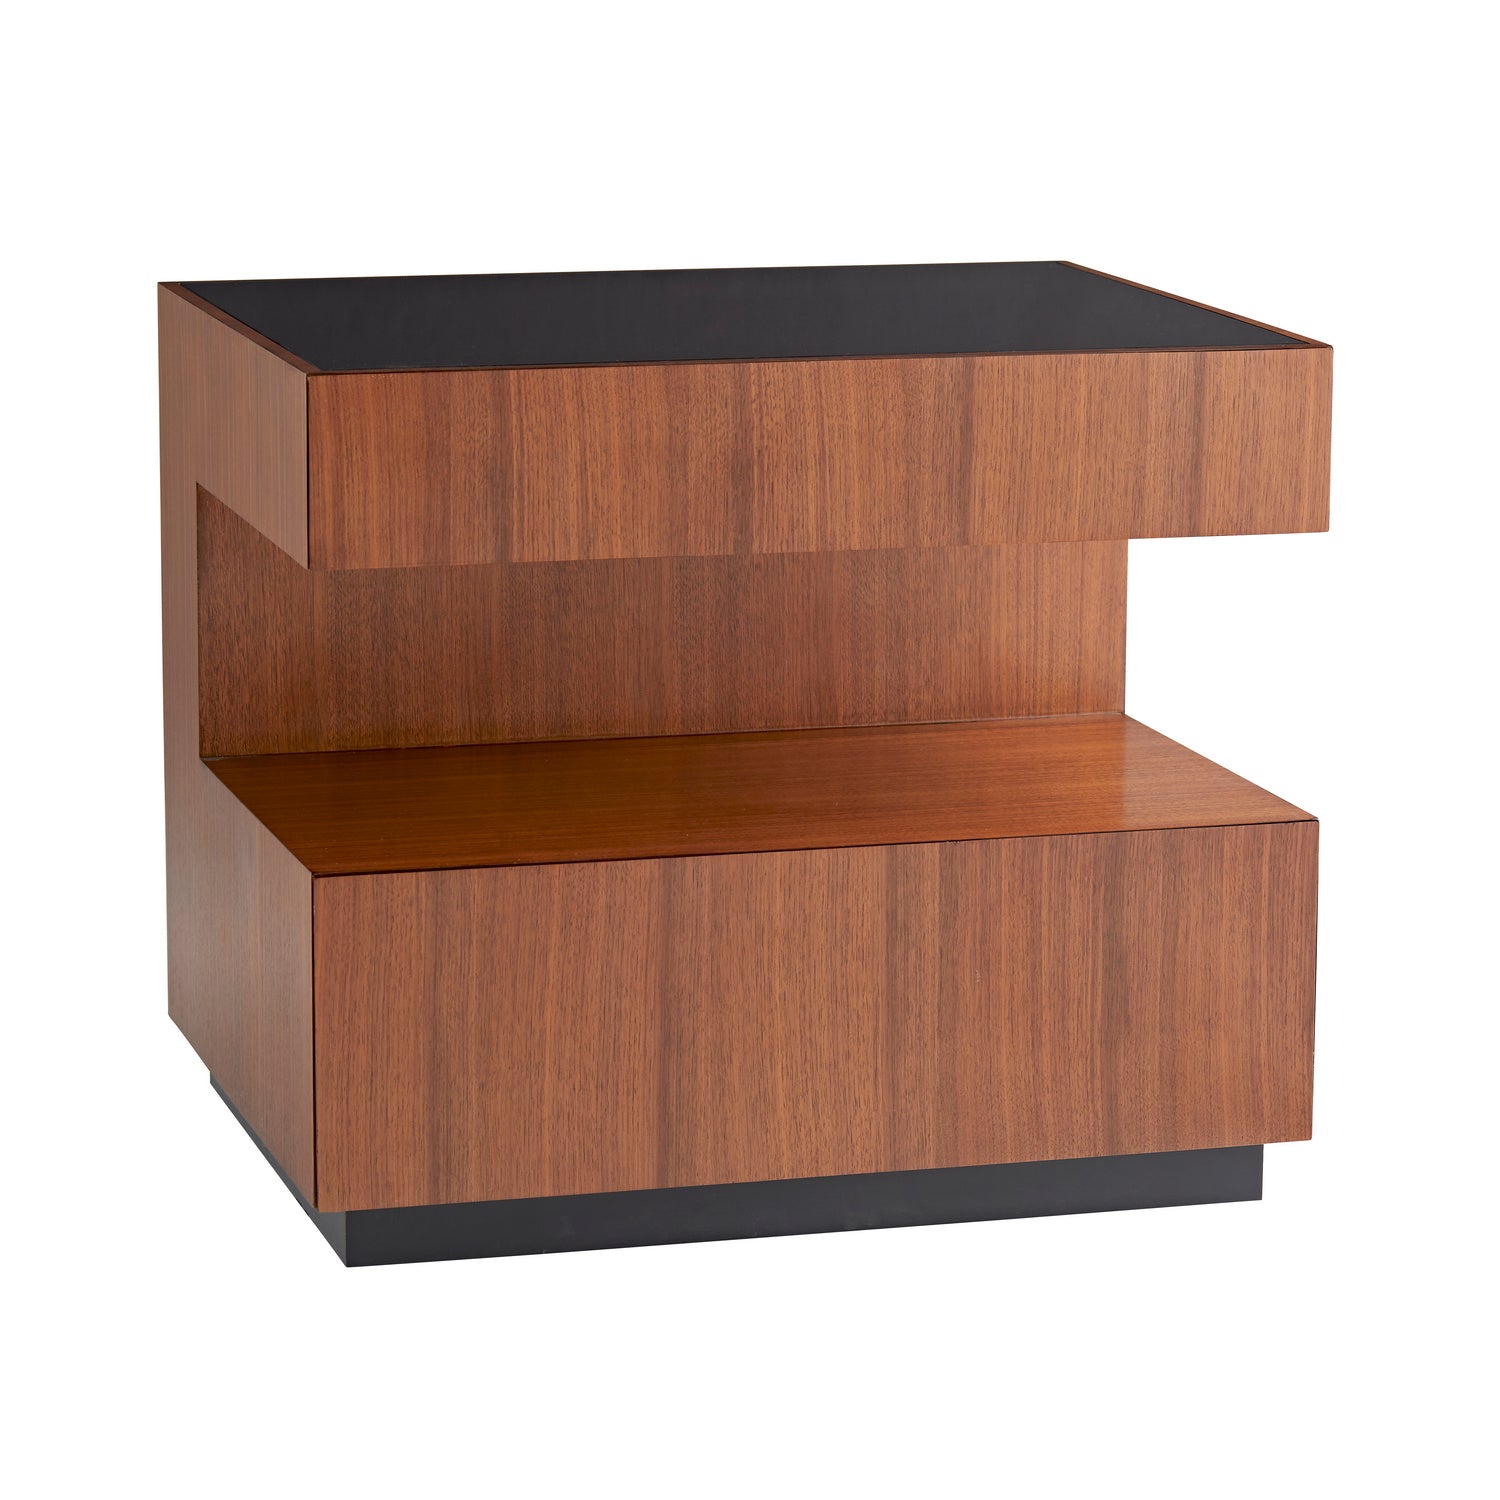 End Table from the Geron collection in Satin Walnut finish